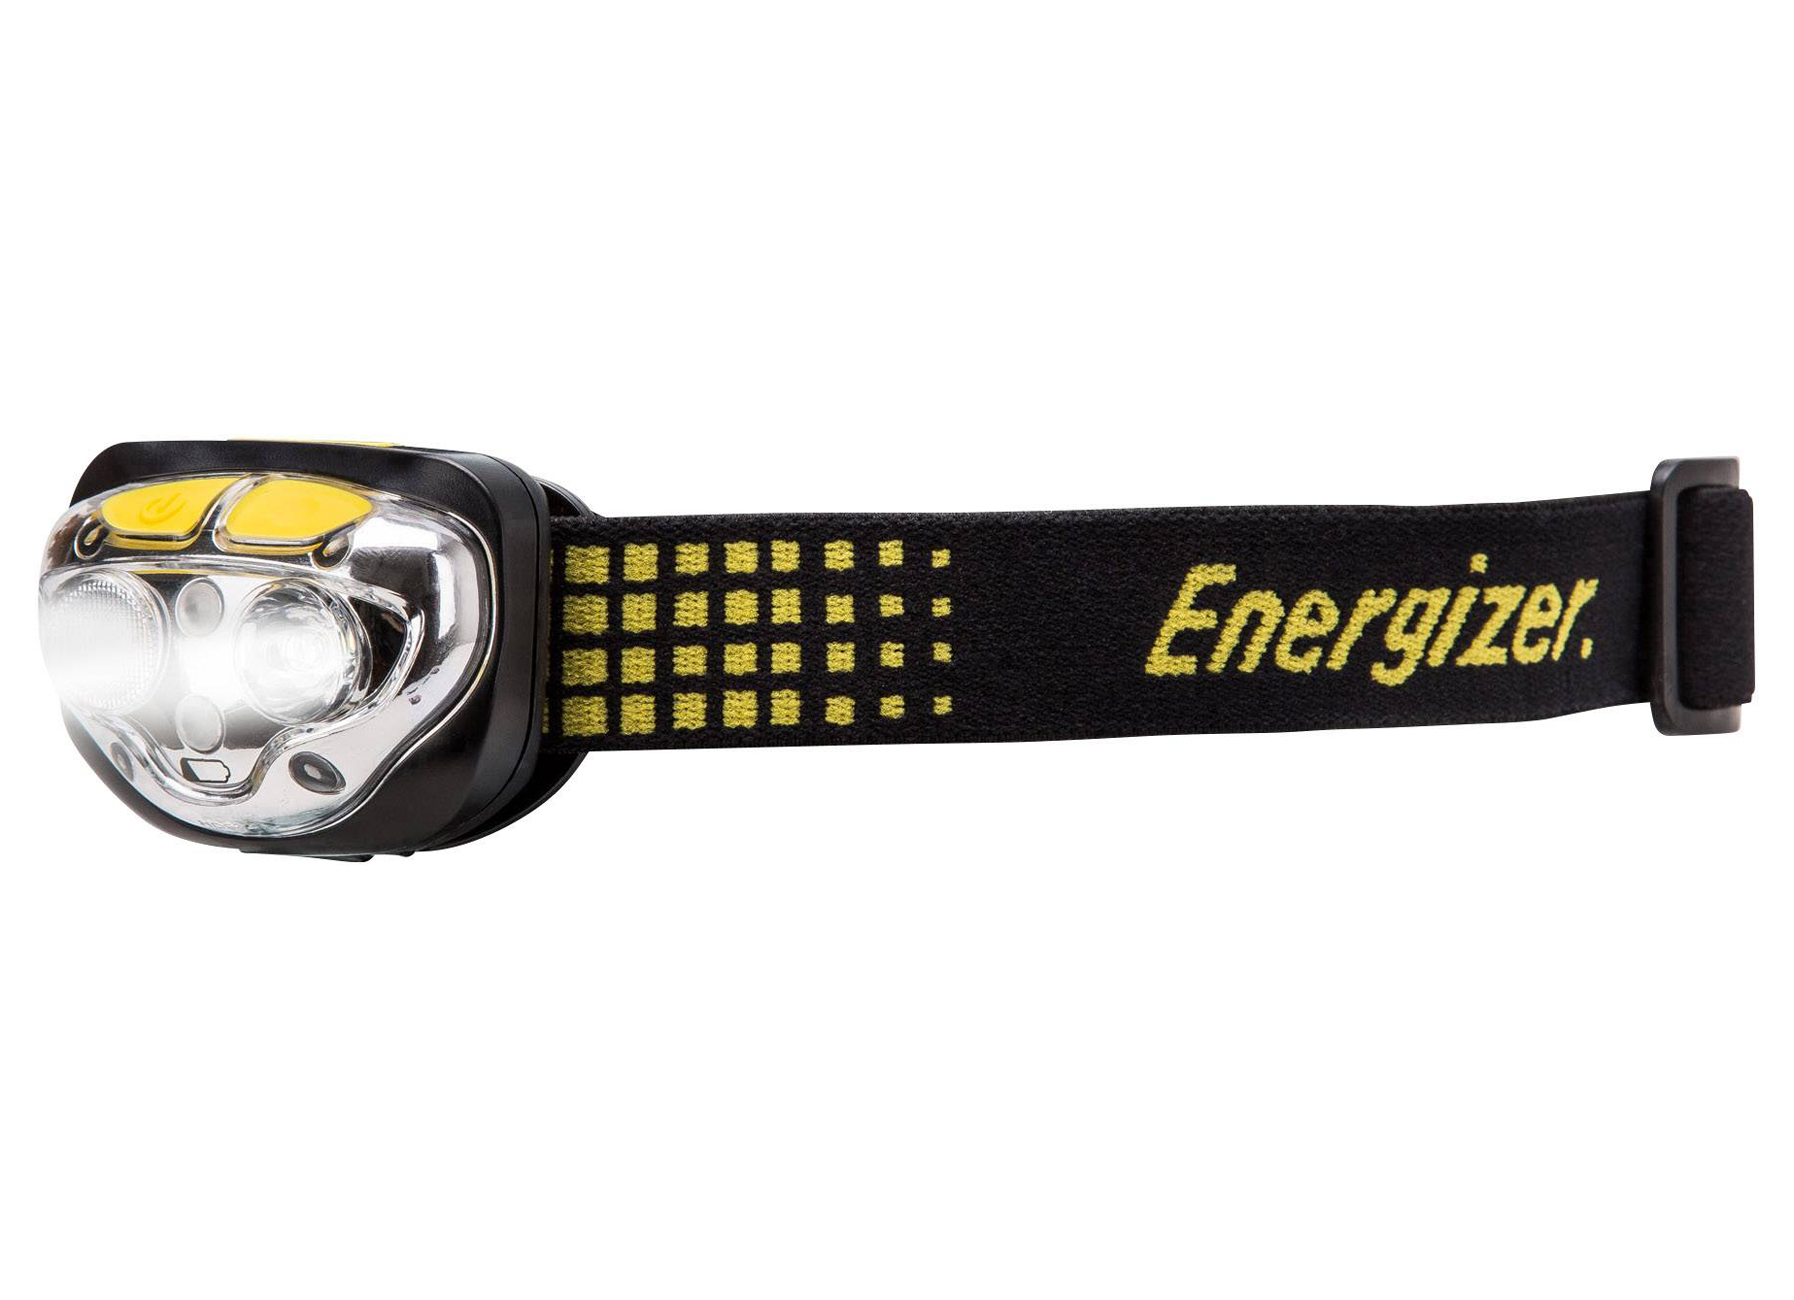 ENERGIZER LAMPE FRONTALE VISION ULTRA HD + 3 AAA BATTERIES